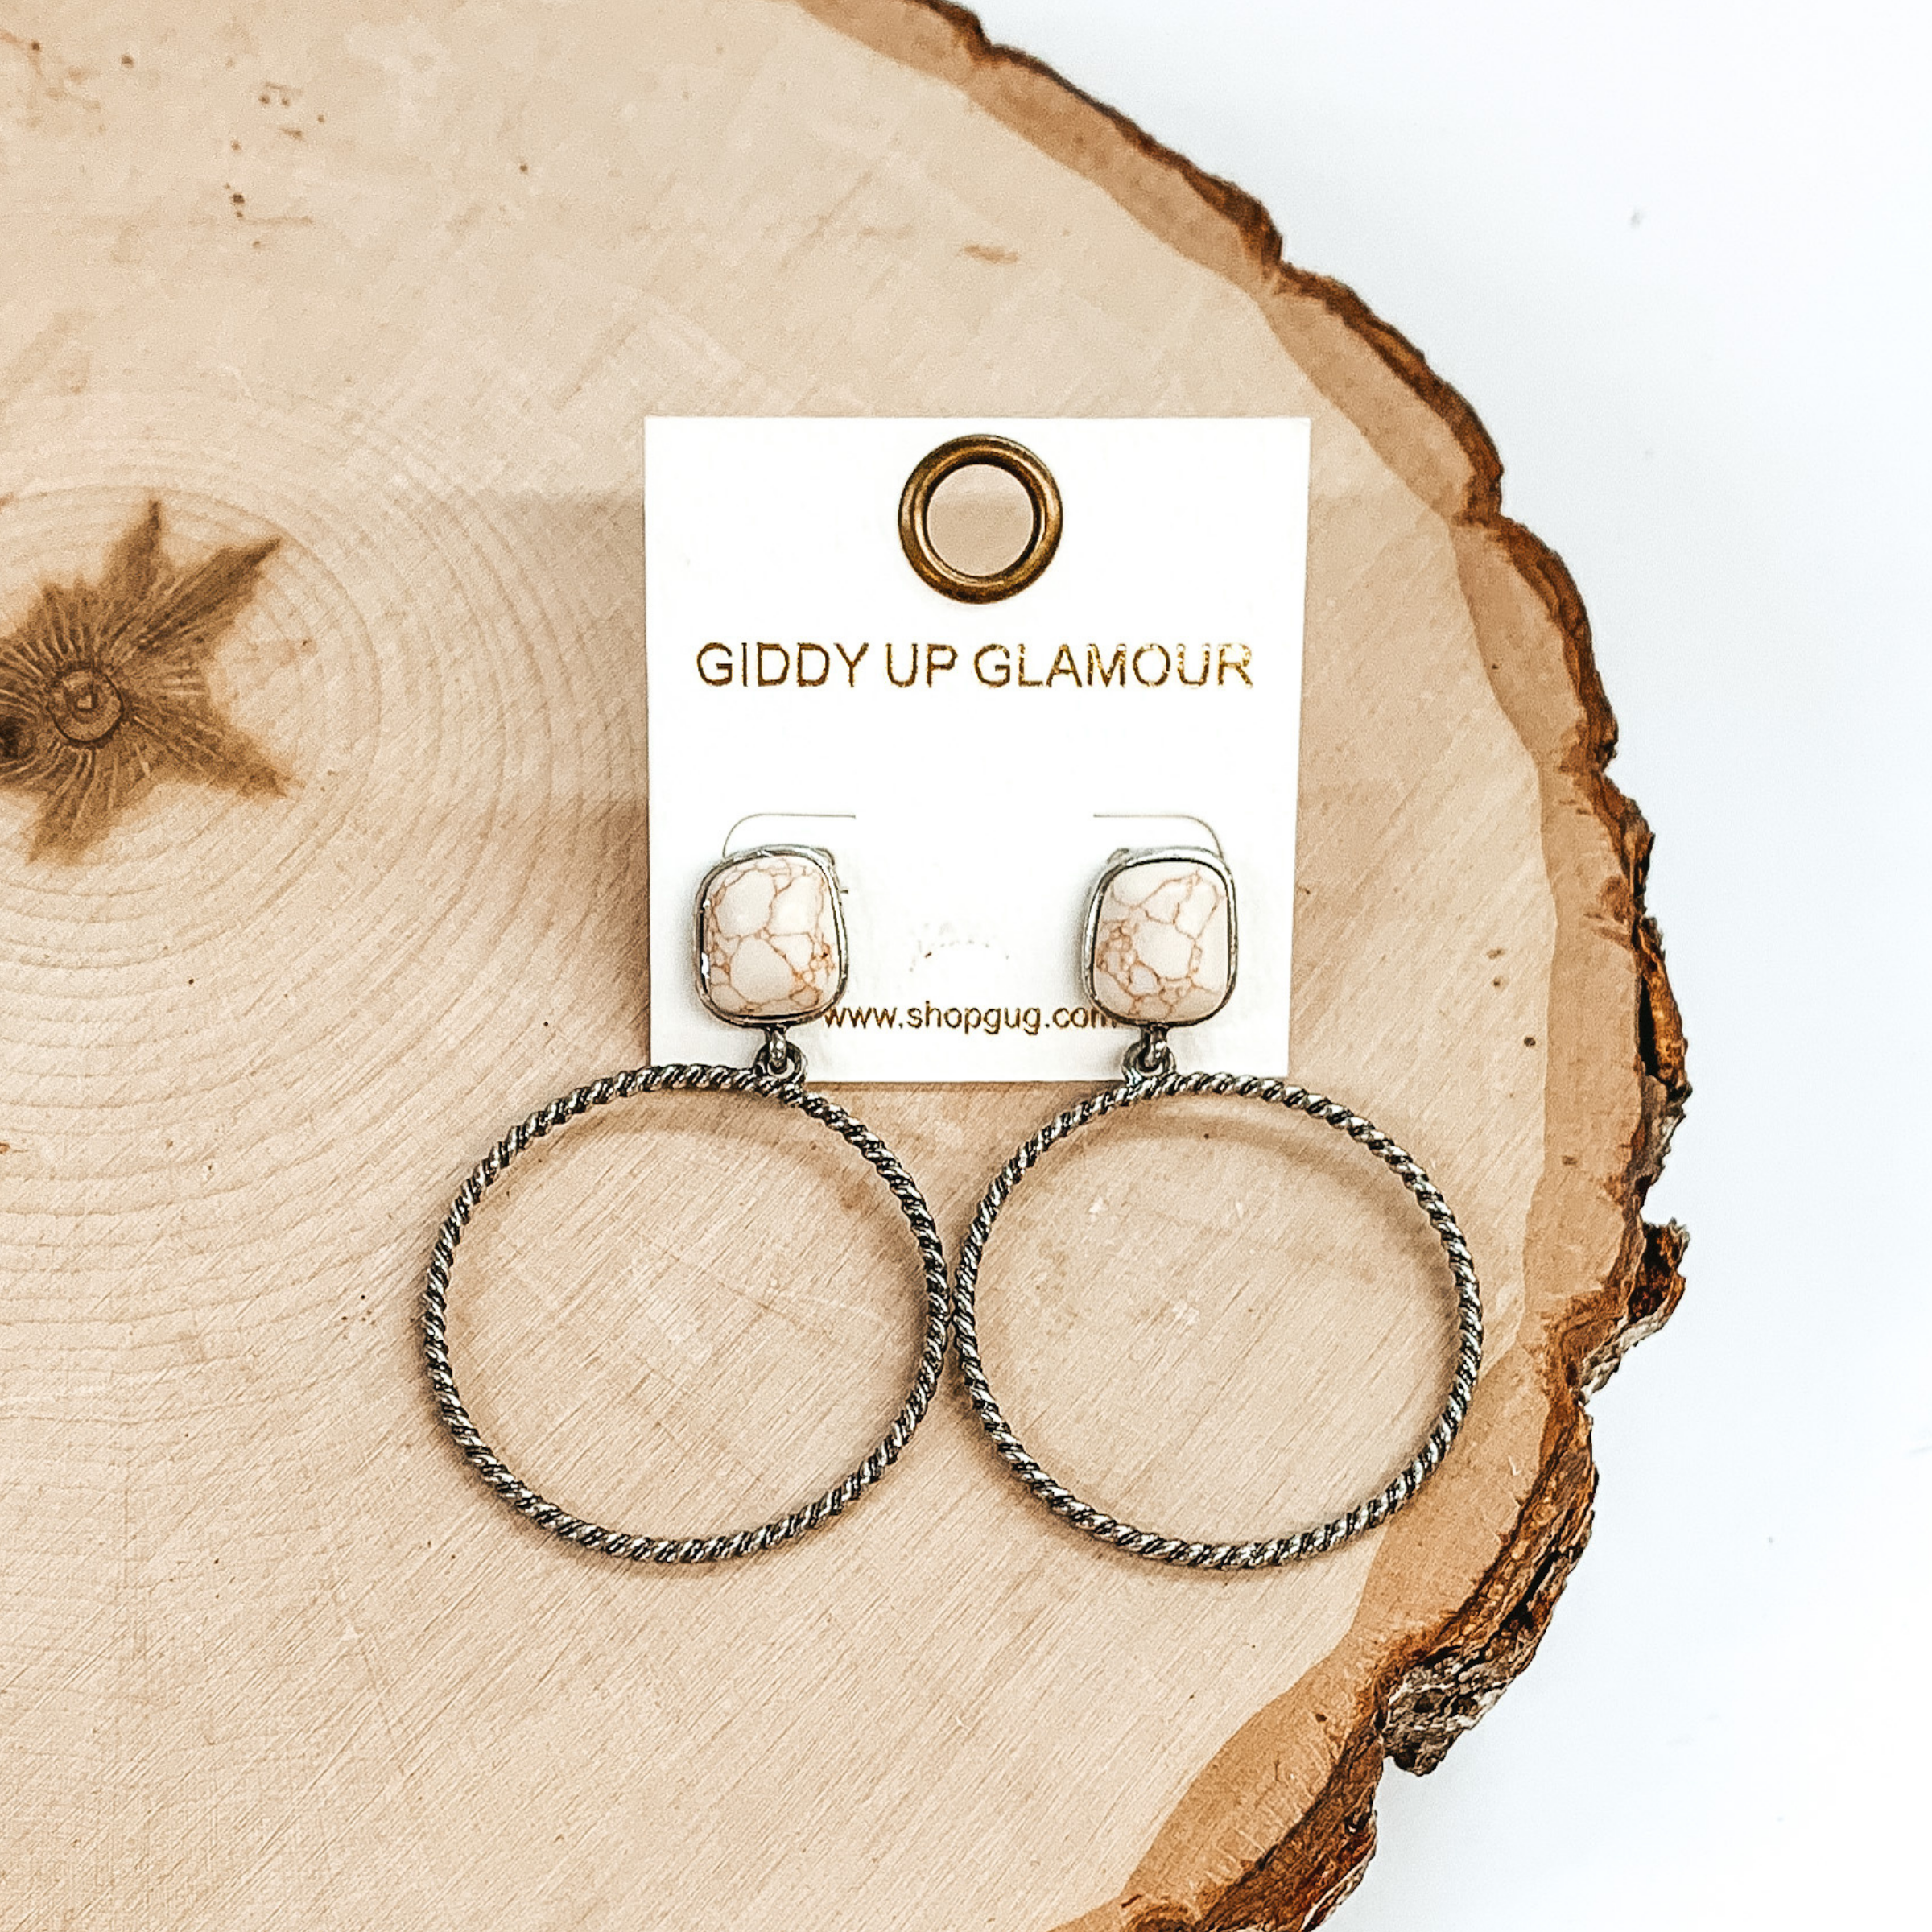 Rounded, square stone stud earrings in ivory with a silver, twisted open circle pendant hanging from the bottom. These earrings are pictured on a piece of wood on a white background.